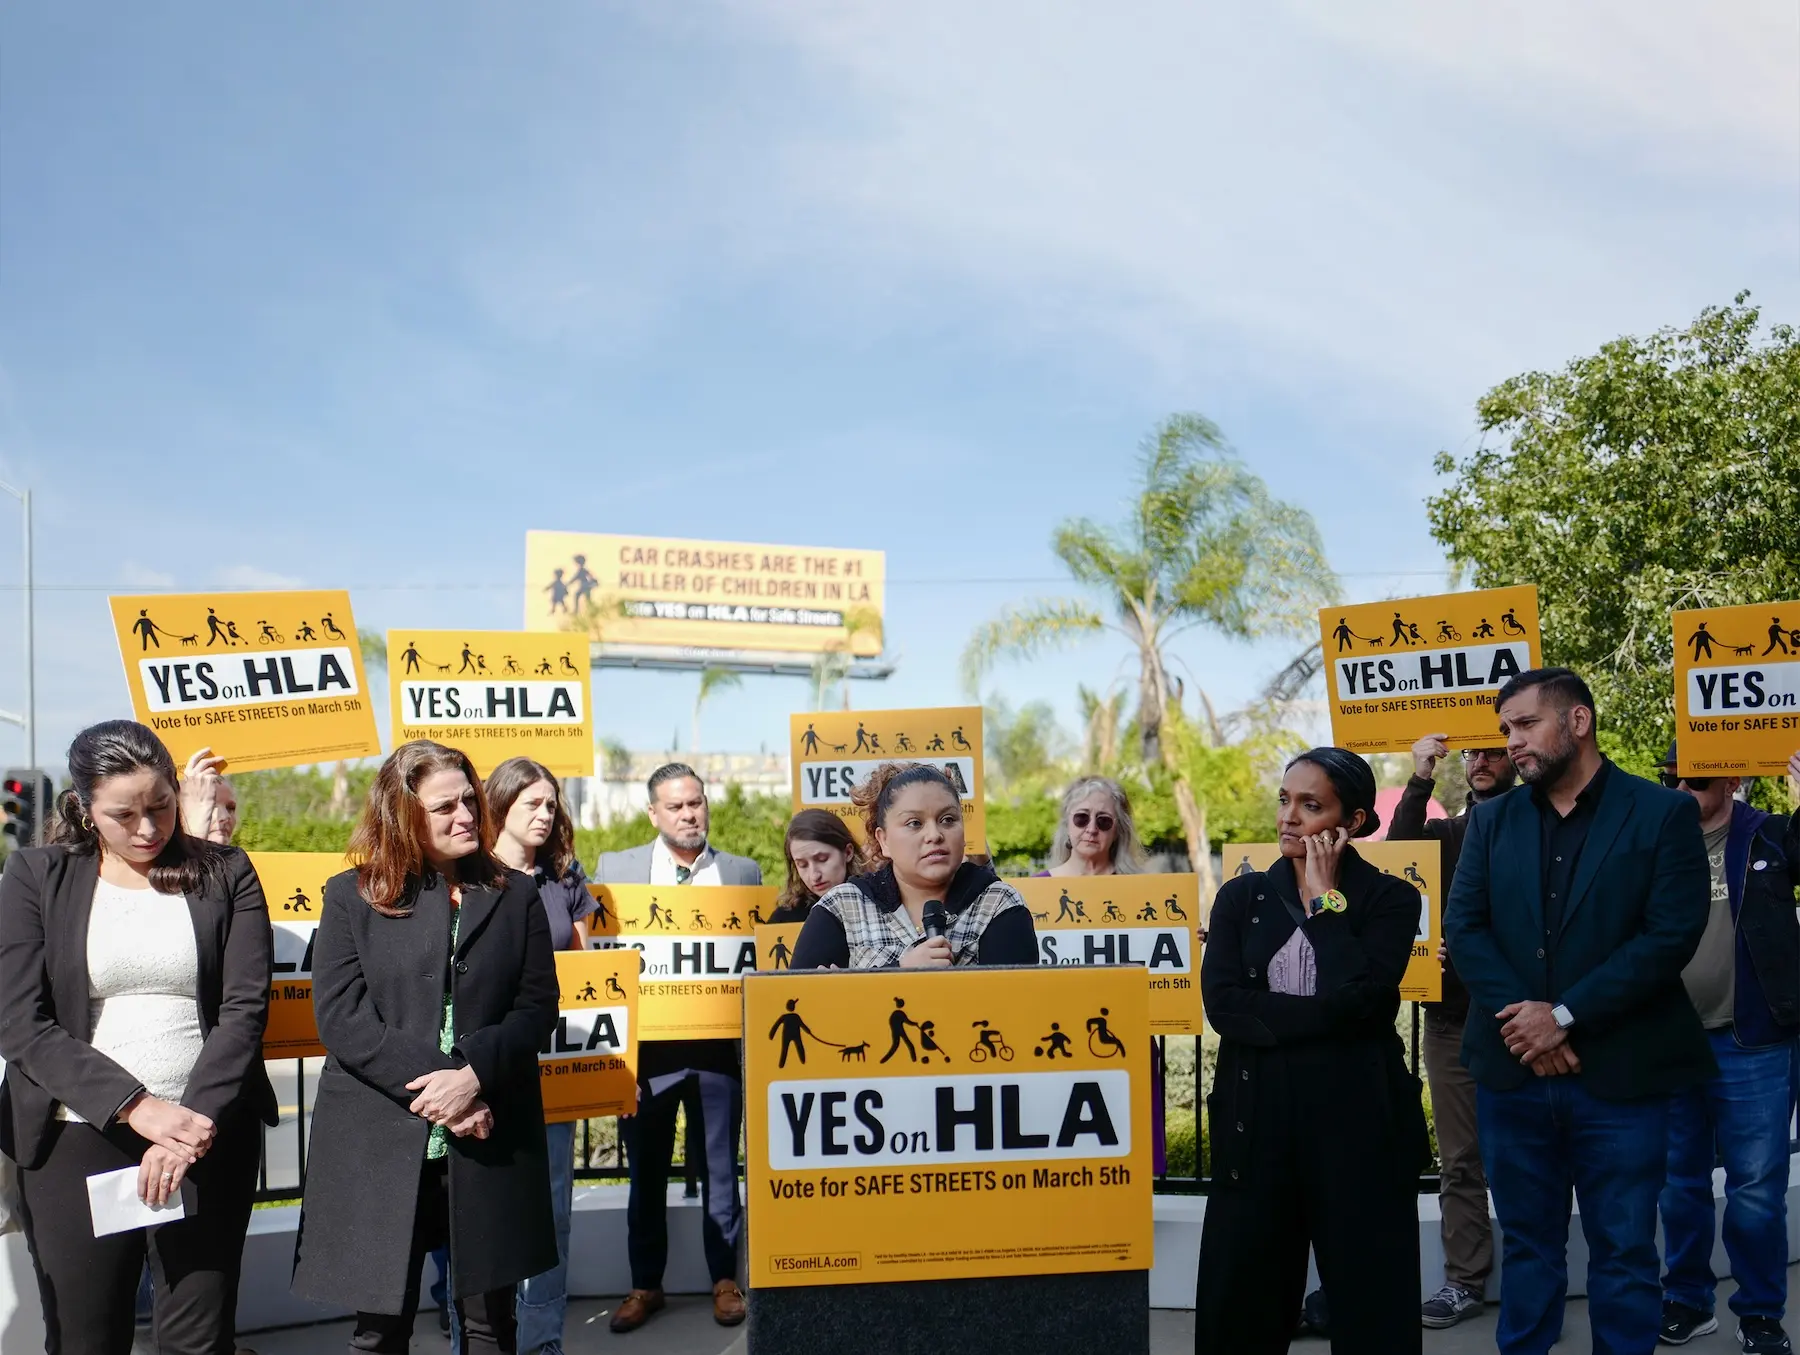 A group of HLA Activists, electeds, and coalition partners stand before a podium holding bright yellow 'Yes on HLA' signs. Behind them are palm trees, a blue sky, and a yellow billboard that says "Car Crashes are the #1 Killer of Kids in LA". 